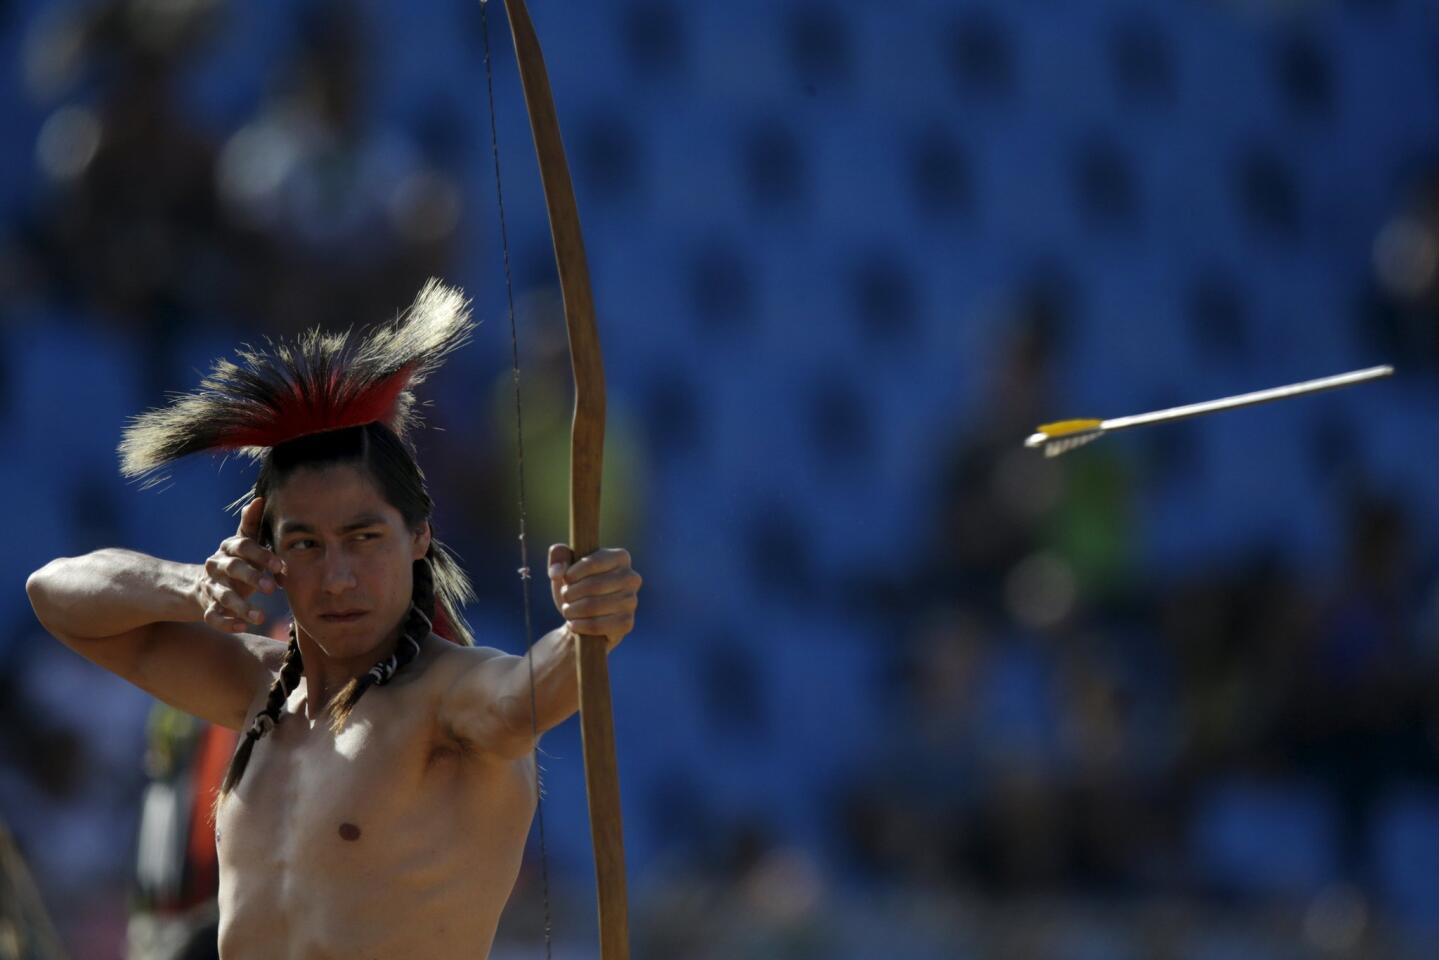 An indigenous man from the U.S. fires an arrow during the bow-and-arrow competition at the first World Games for Indigenous Peoples in Palmas